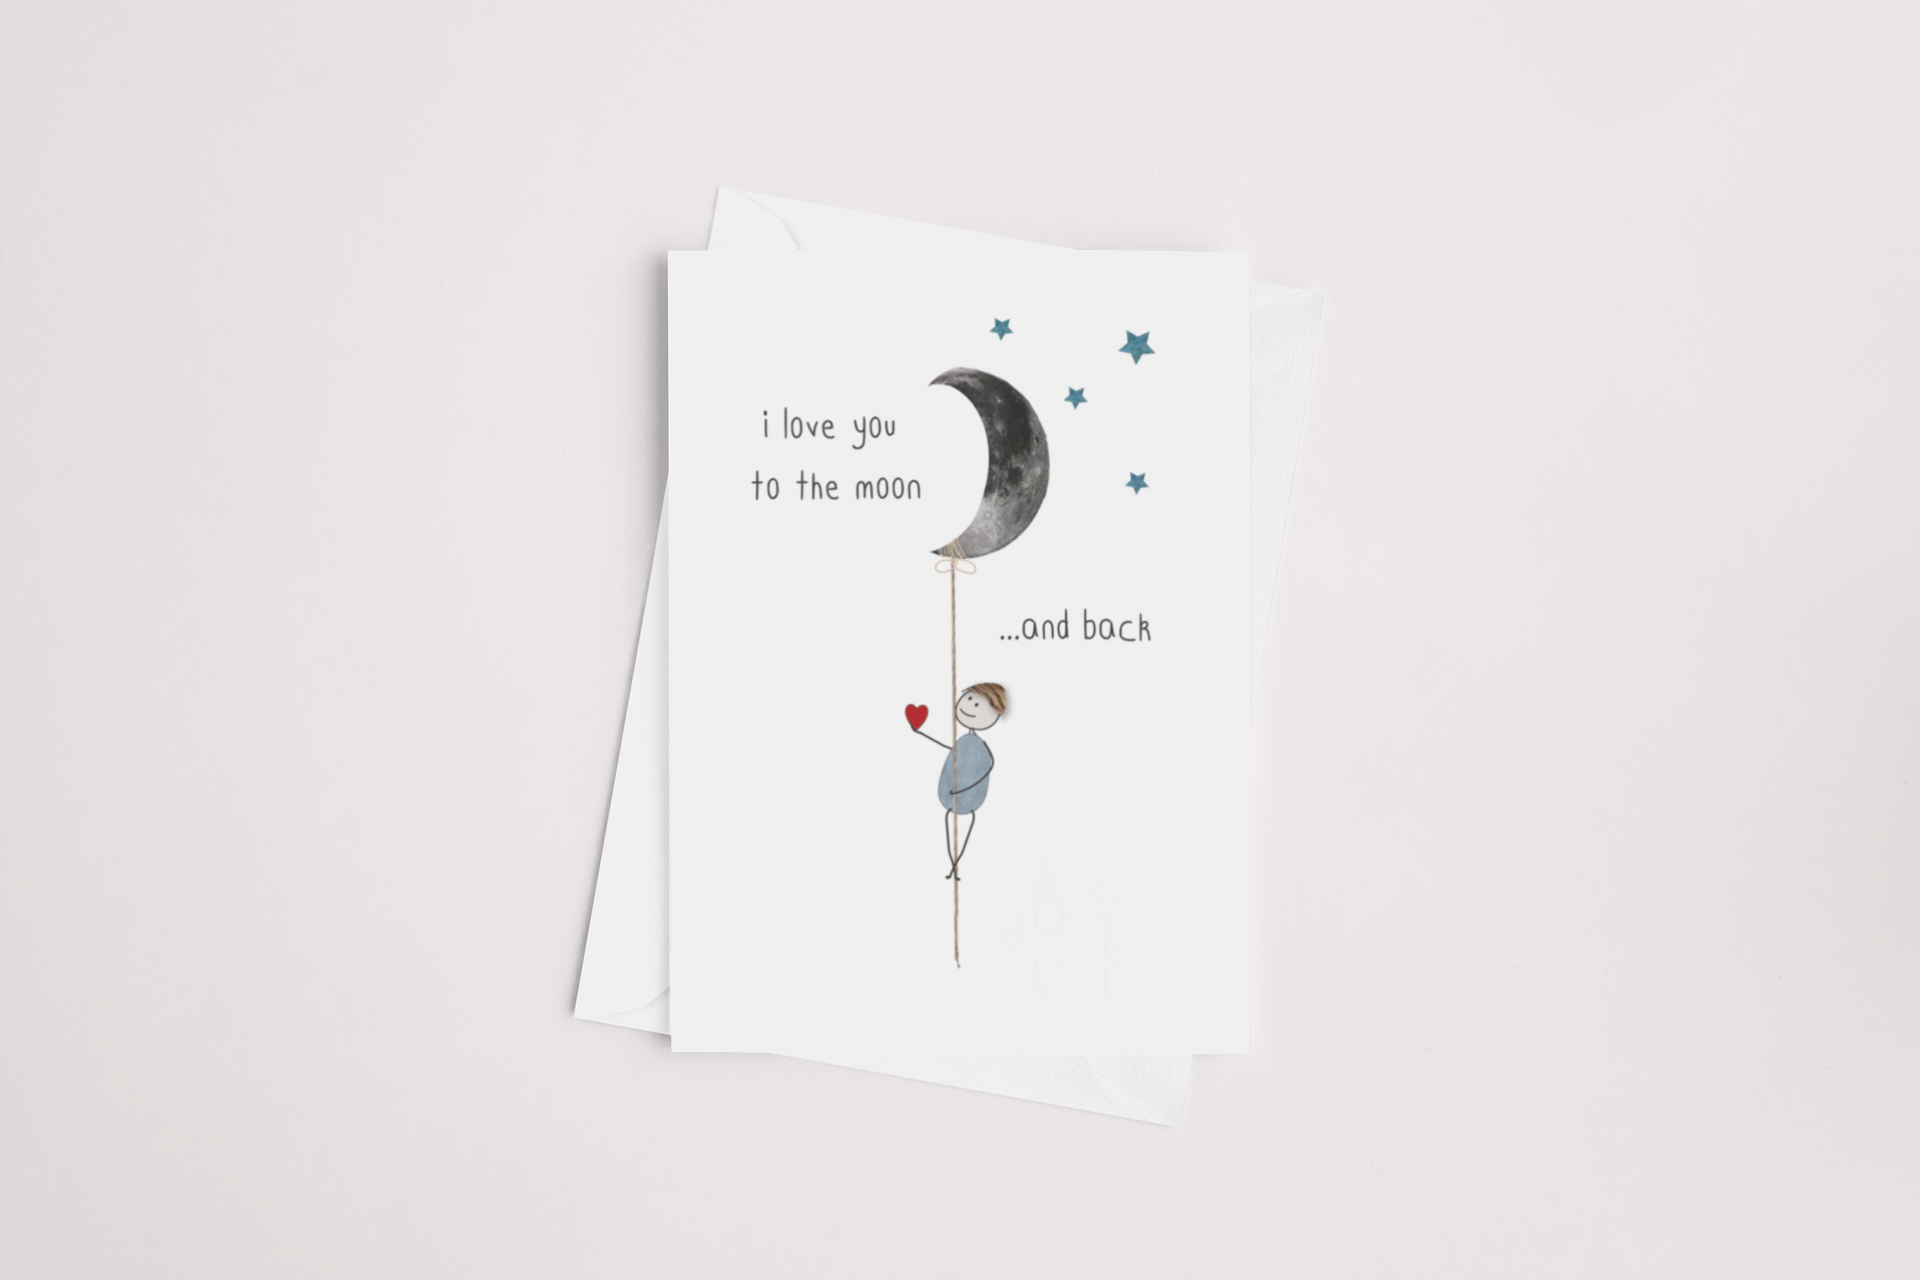 A charming Moon Love Card by icandy, with the phrase "i love you to the moon... and back" accompanied by an illustration of a whimsical figure holding a heart-shaped balloon.